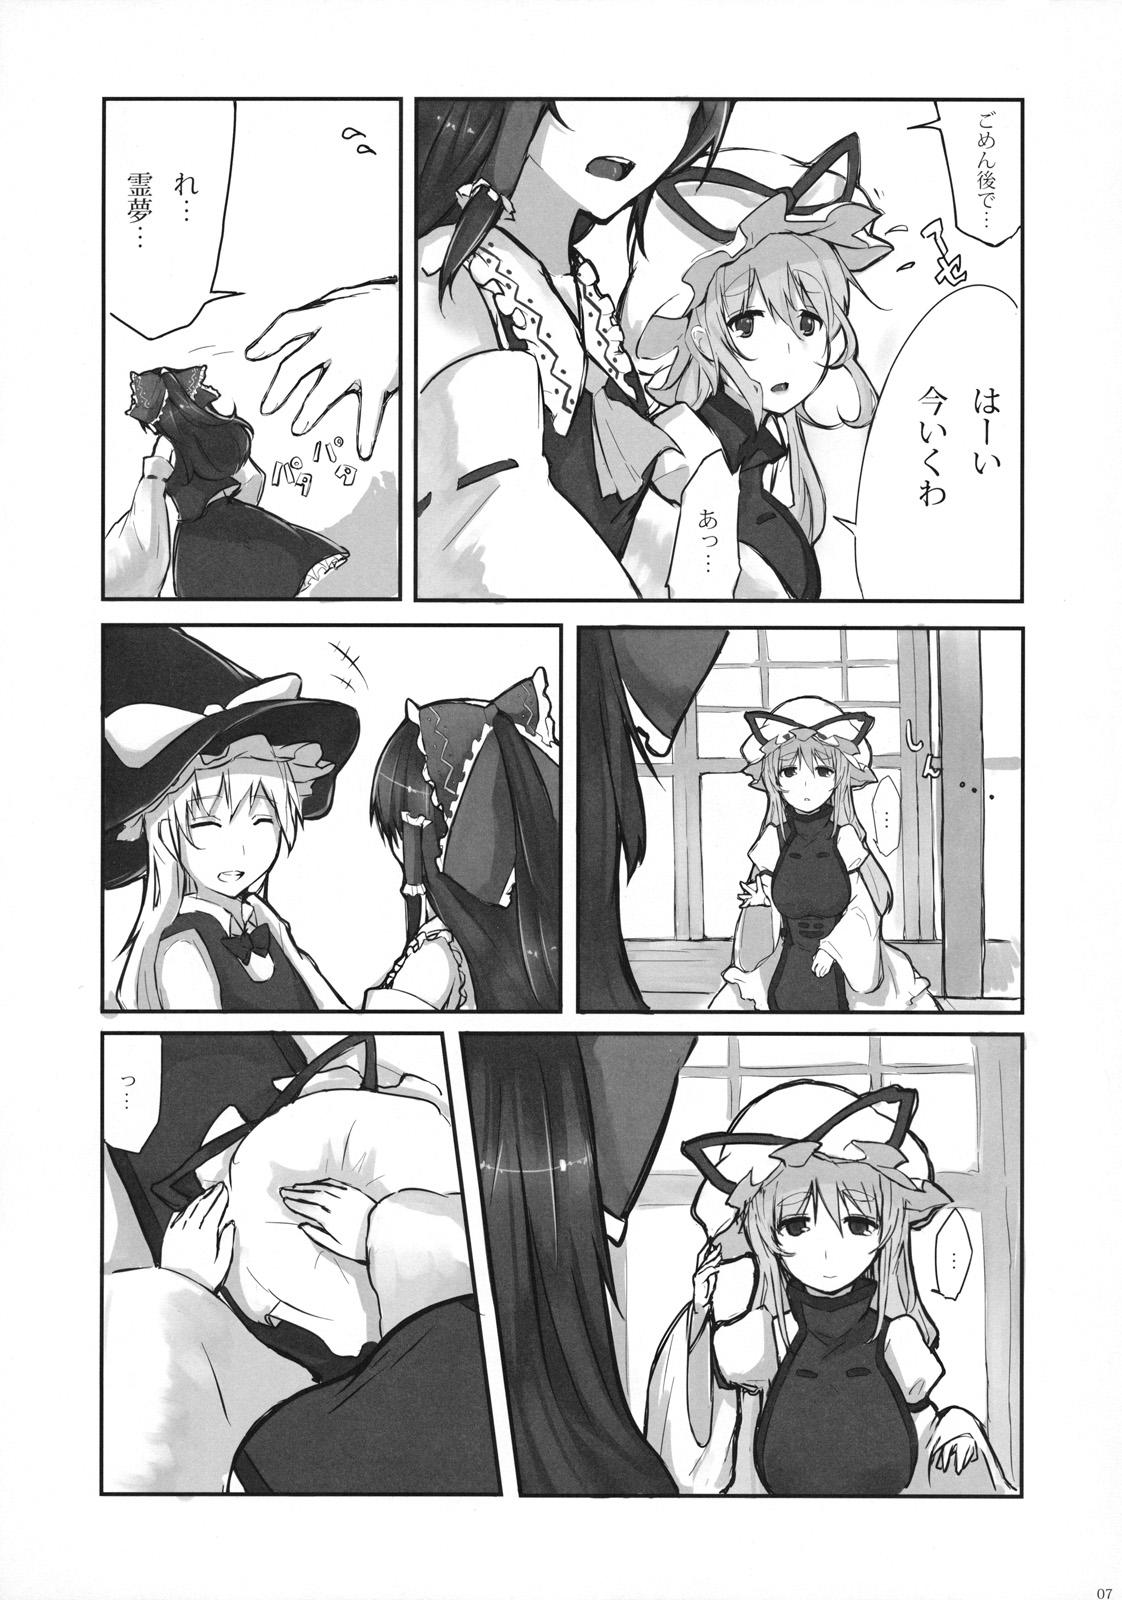 Best Blowjobs Ever Murasaki ni Somaru - Touhou project Online - Page 7